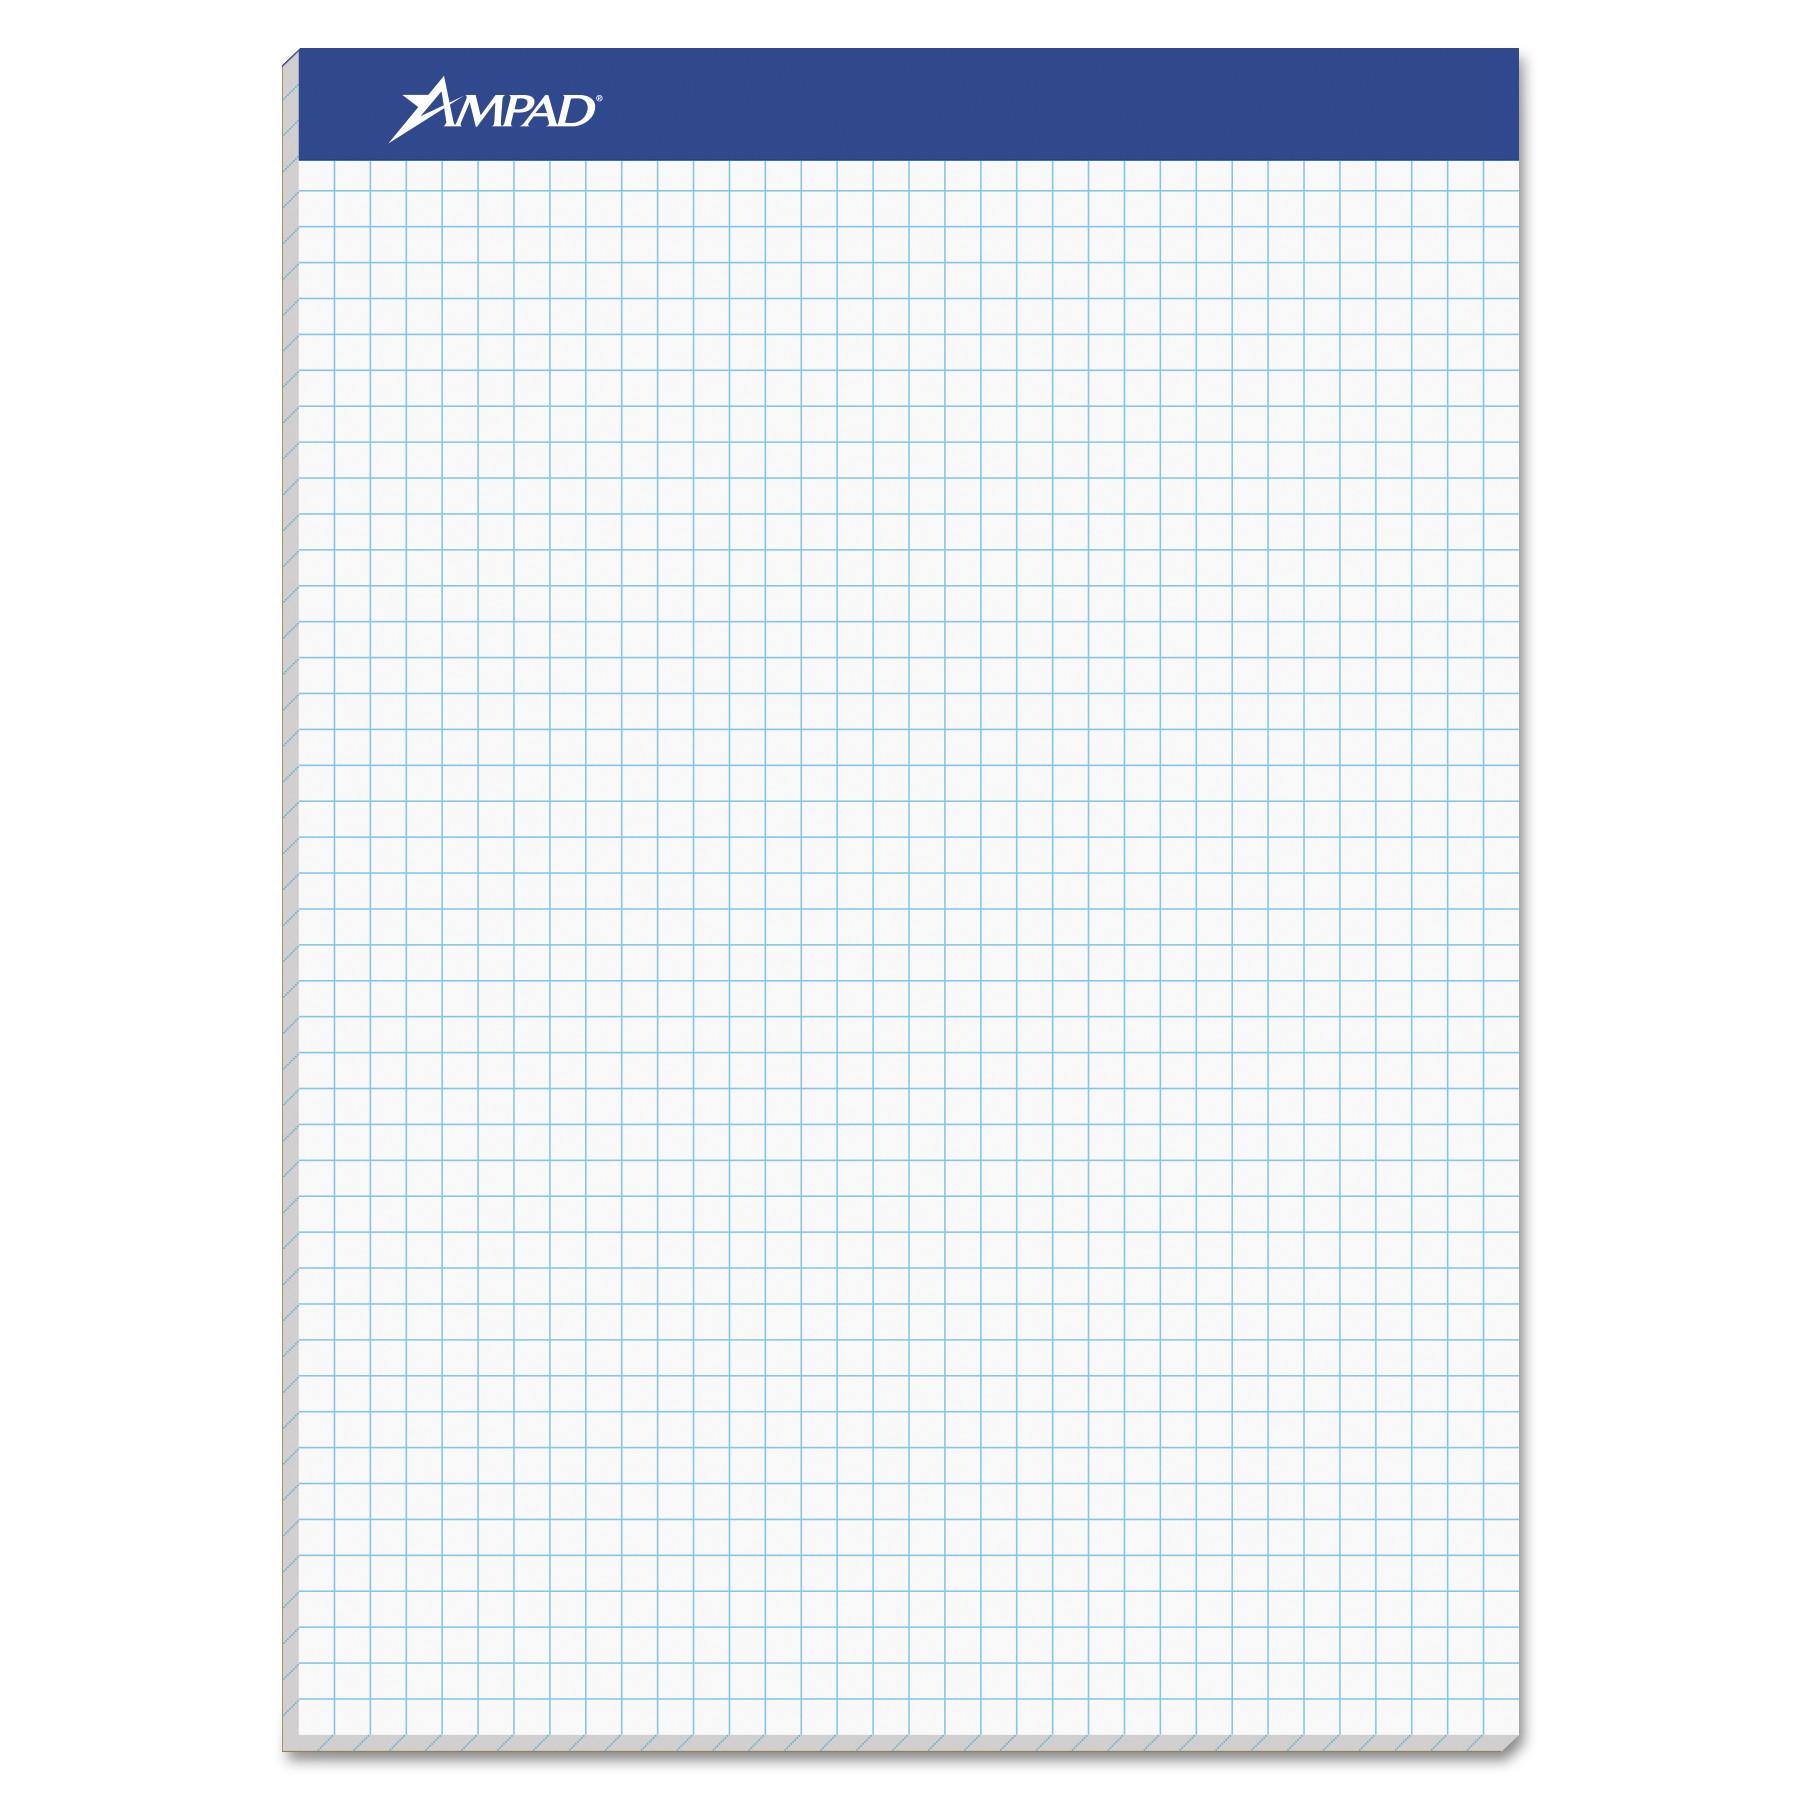  Ampad 20-210 Quad Double Sheet Pad, 4 sq/in Quadrille Rule, 8.5 x 11.75, White, 100 Sheets (TOP20210) 